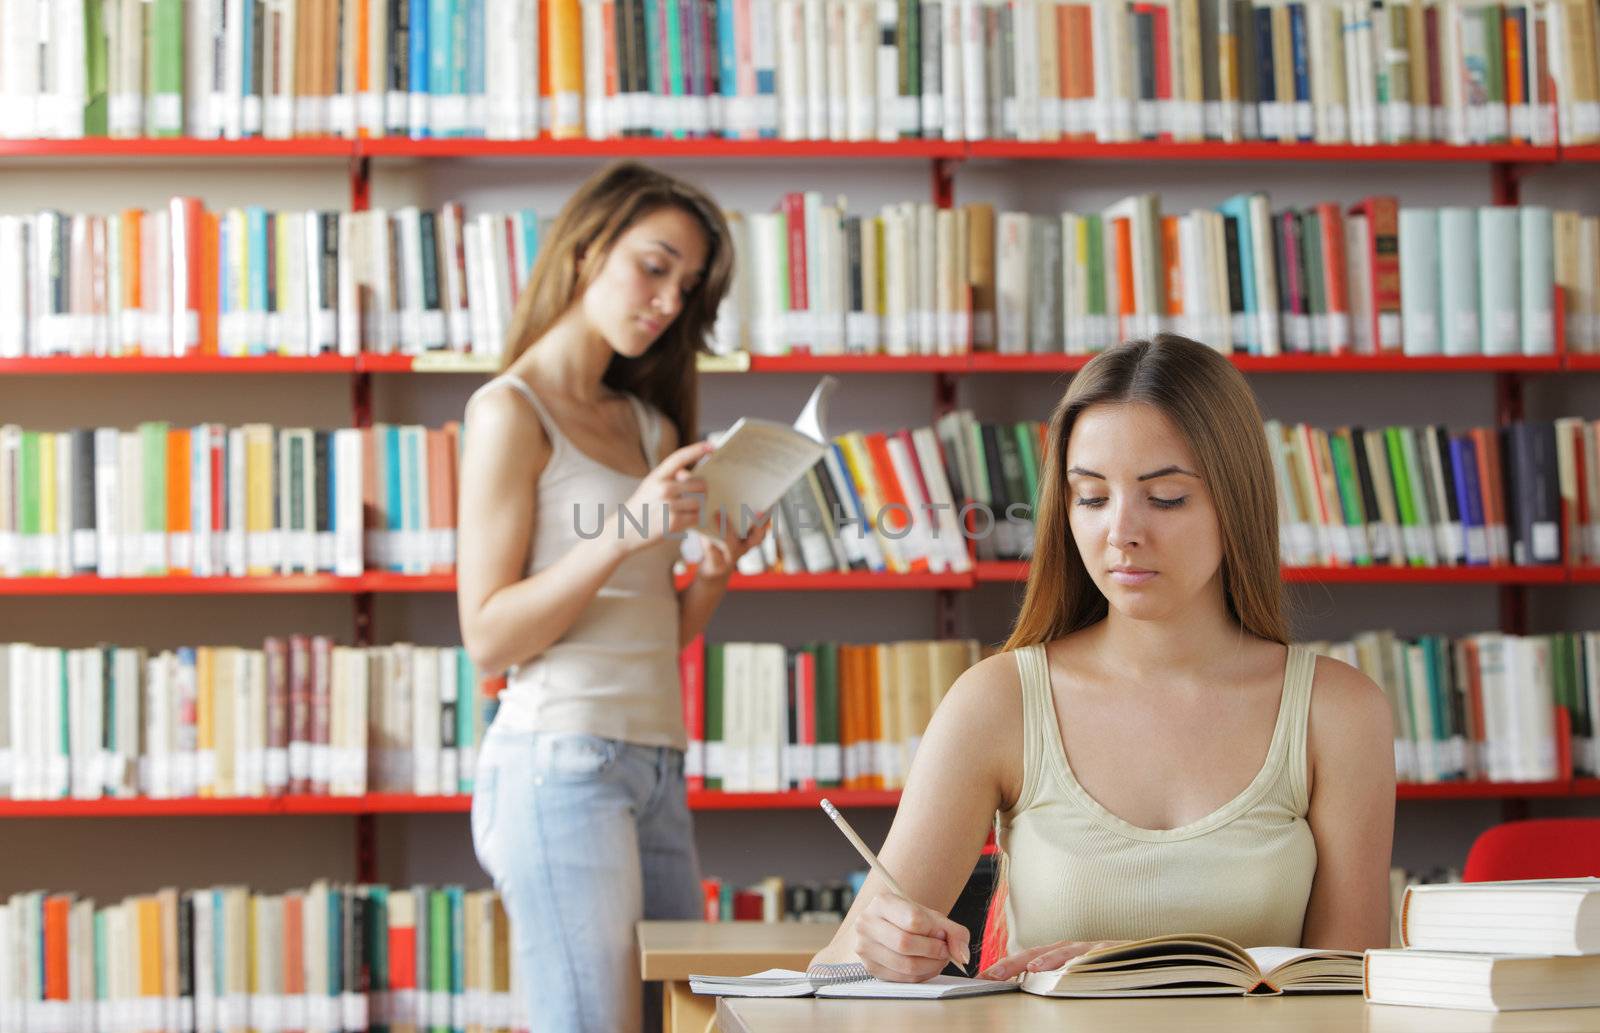 Portrait of a student in a library, student reading a book on background